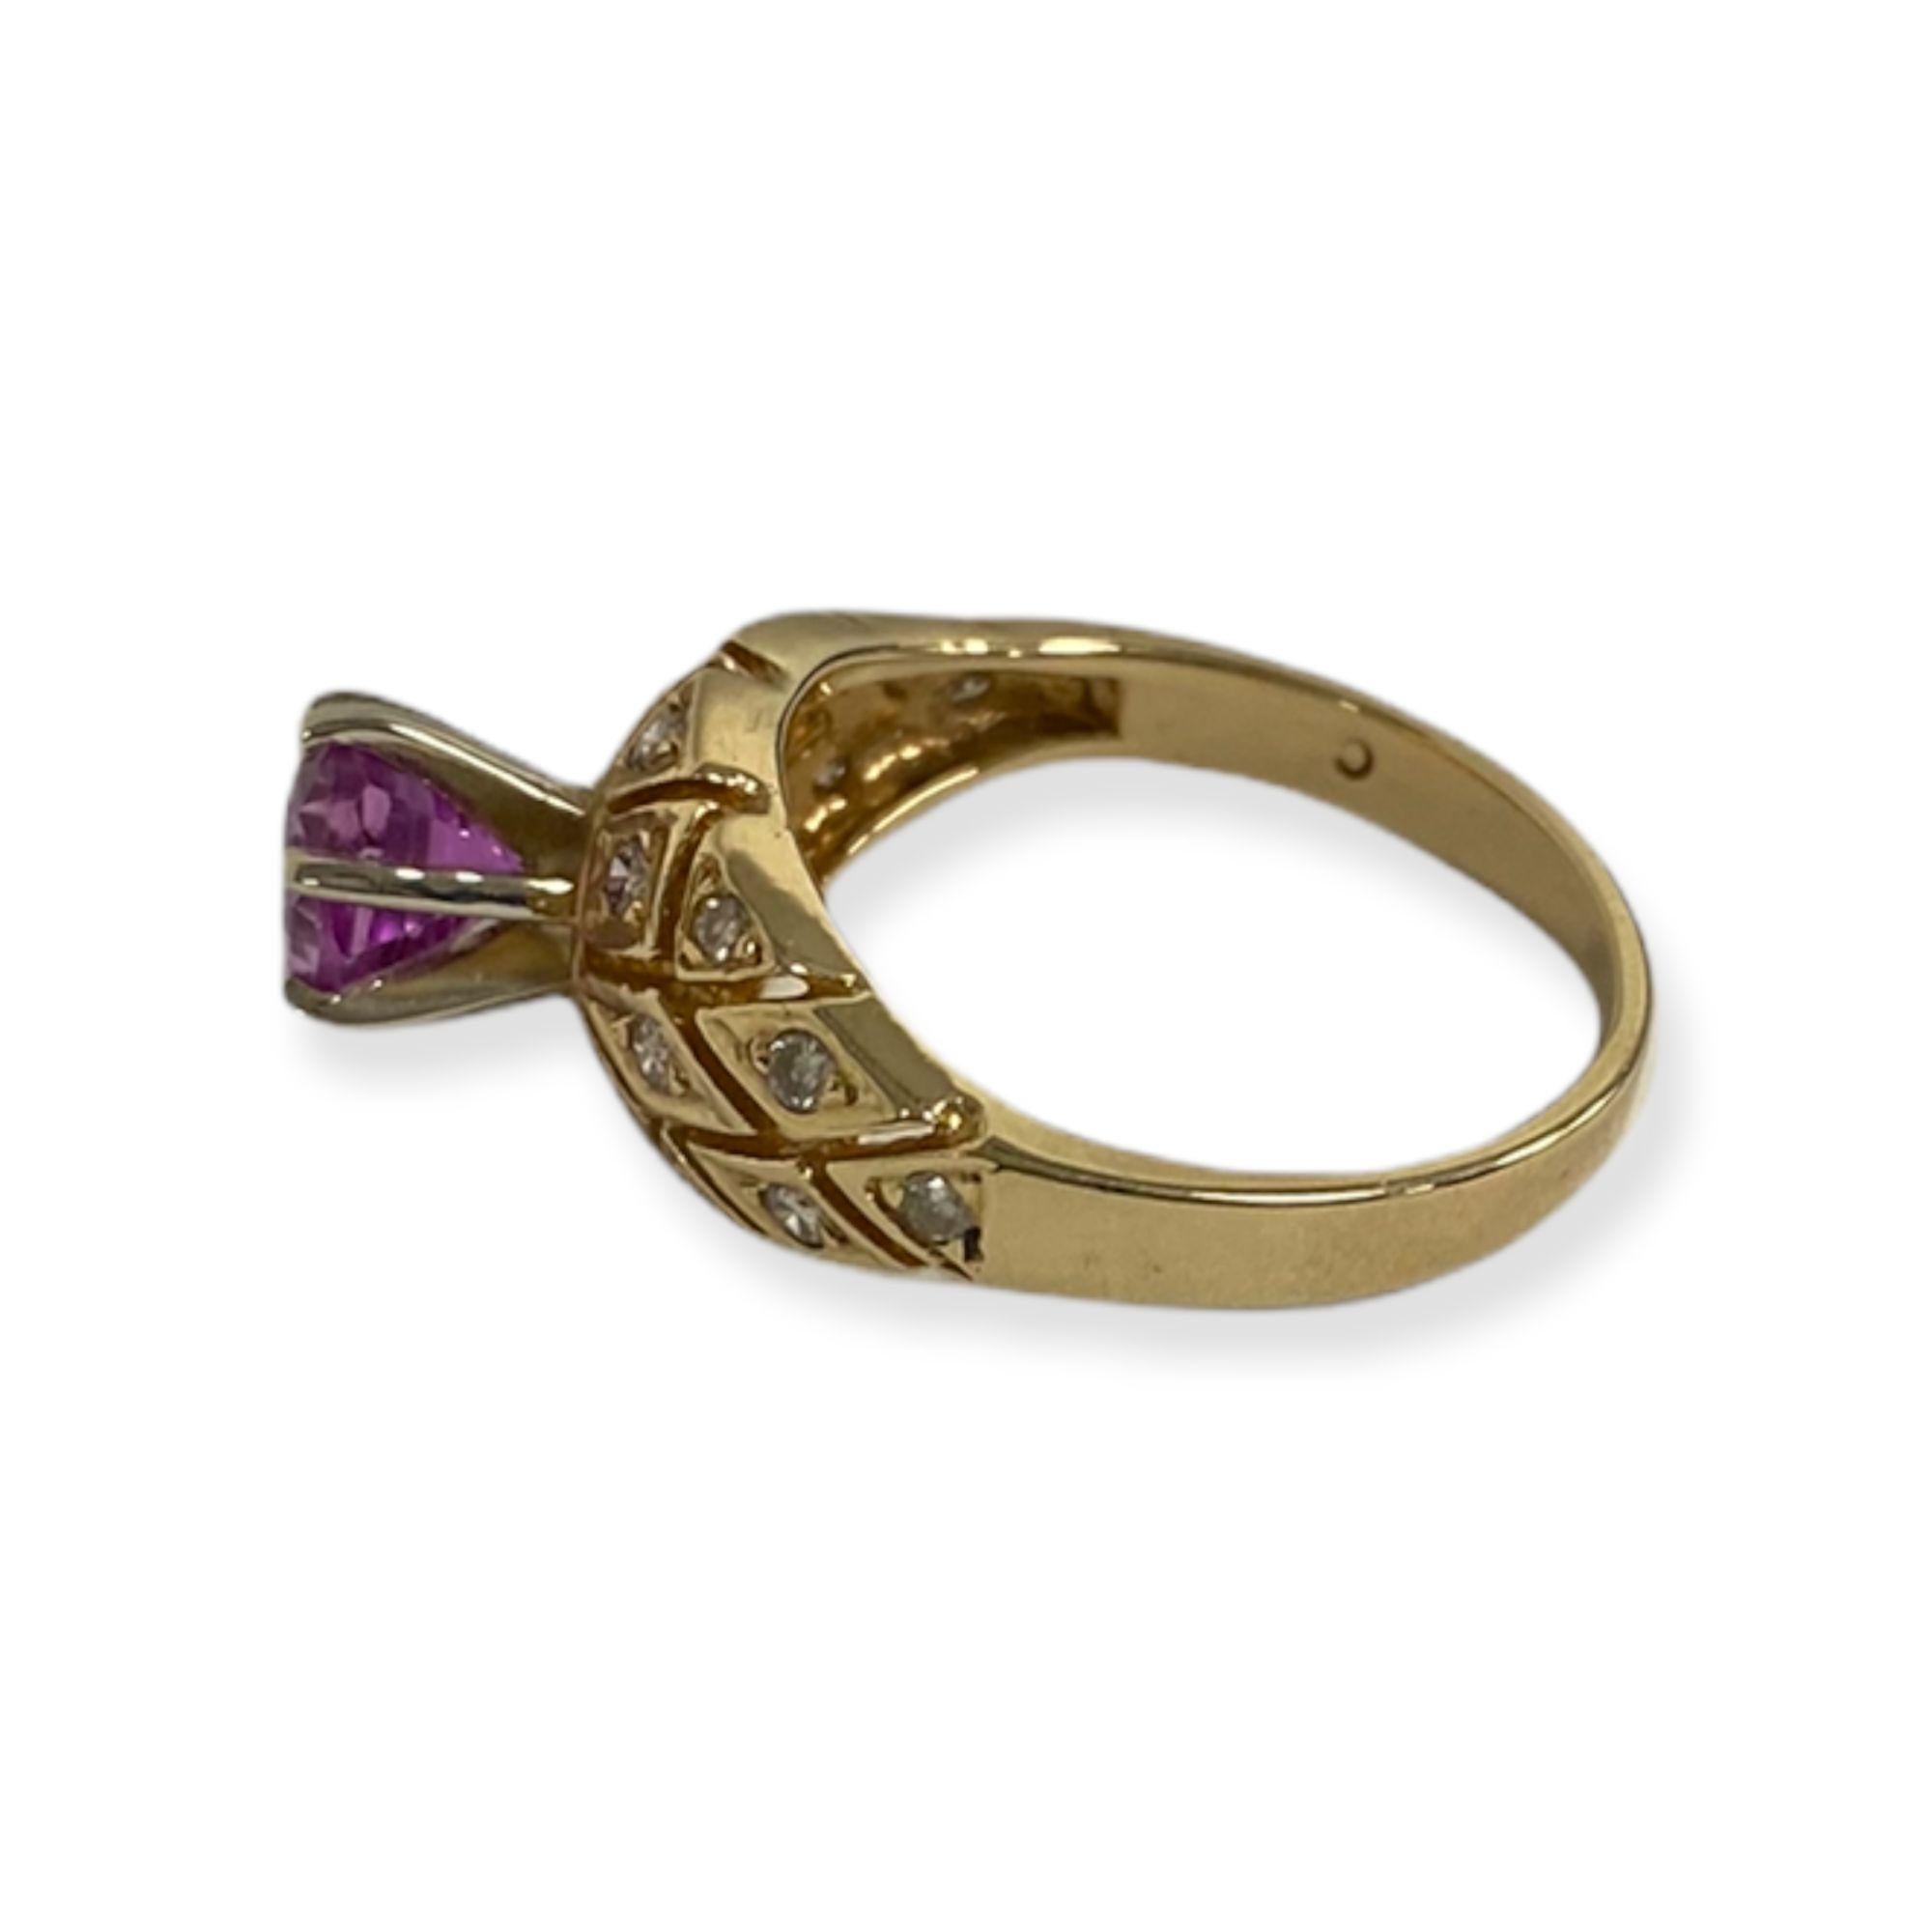 This spectacular ring from the Suzy Levian Vintage-Inspired One-of-a-Kind collection features an array of white diamonds (.20cttw) in a slit-cut 14k yellow gold setting, accenting a center, round-cut, elevated pink sapphire (1.20ct). So intricate in